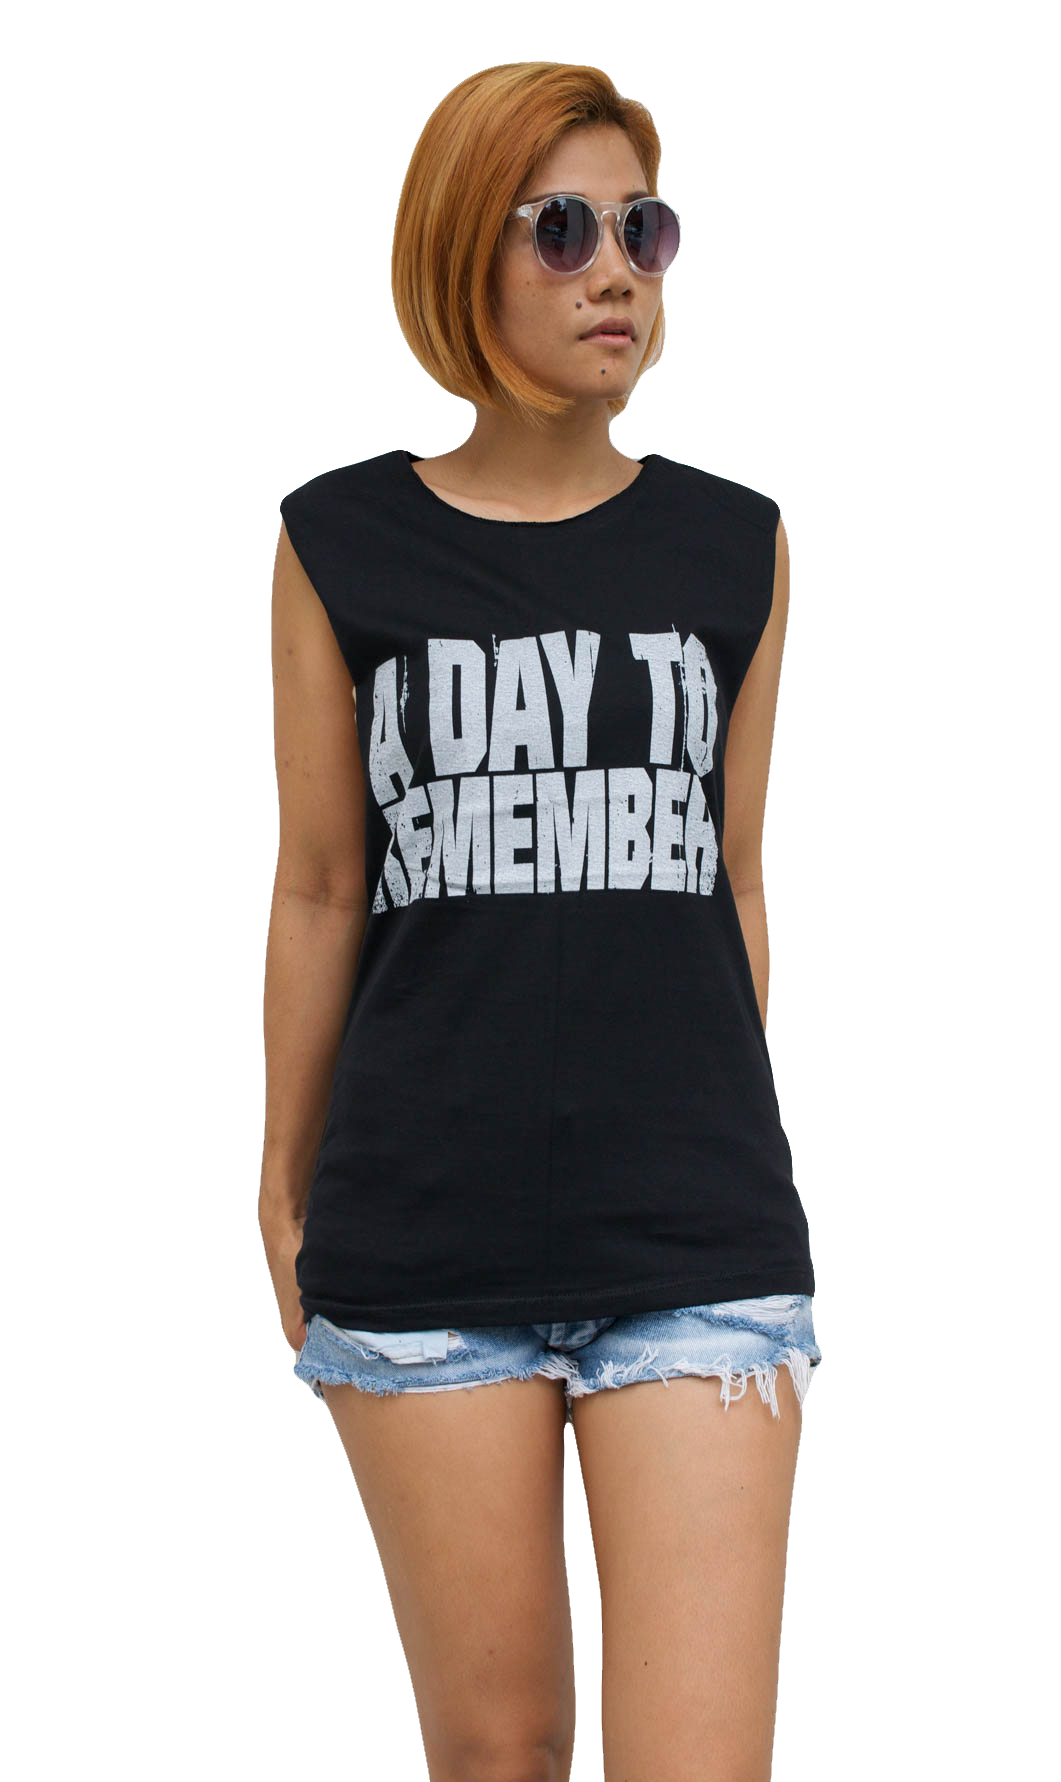 Ladies A Day To Remember Vest Tank-Top Singlet Sleeveless T-Shirt